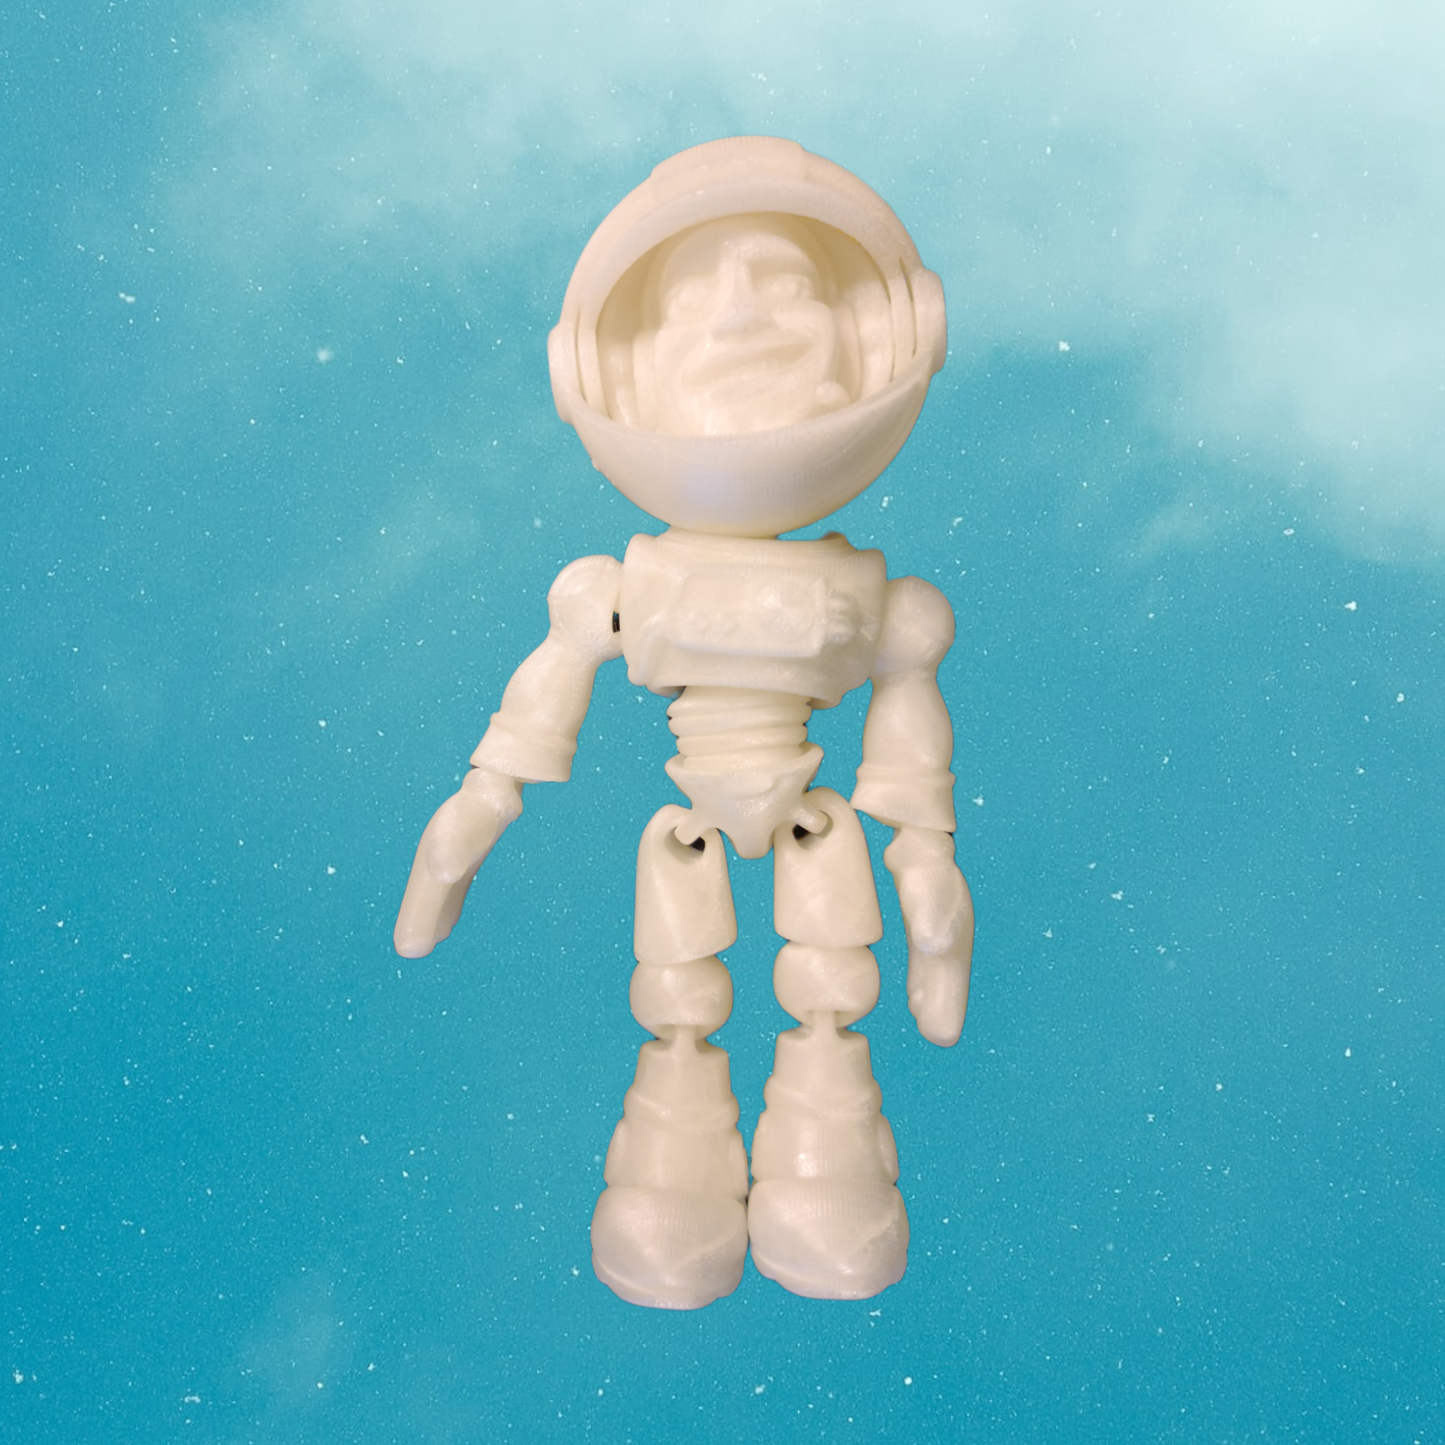 3d print astronaut for a child, Easter basket stuffer for kids, adult birthday gift, glow in the dark toy, space themed birthday party favor